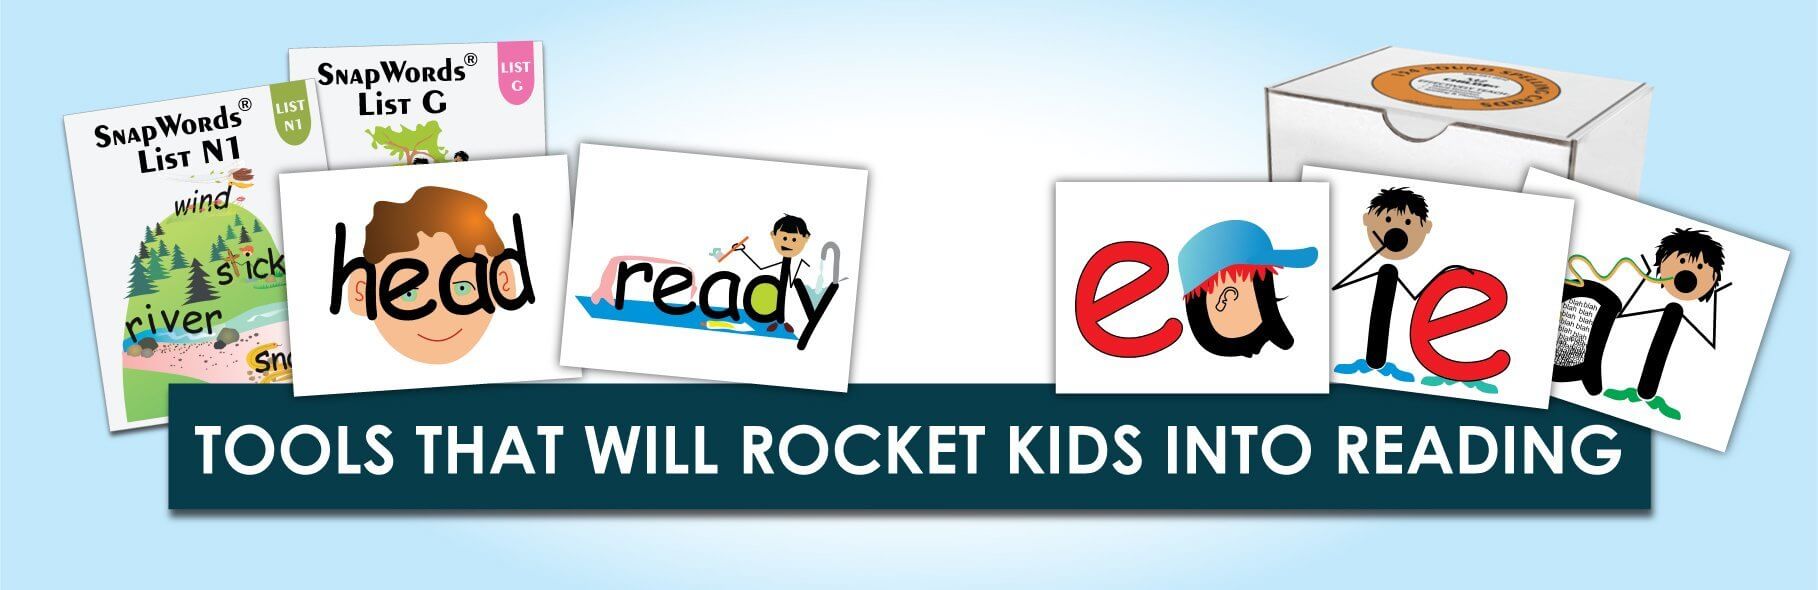 Tools That Will Rocket Kids Into Reading